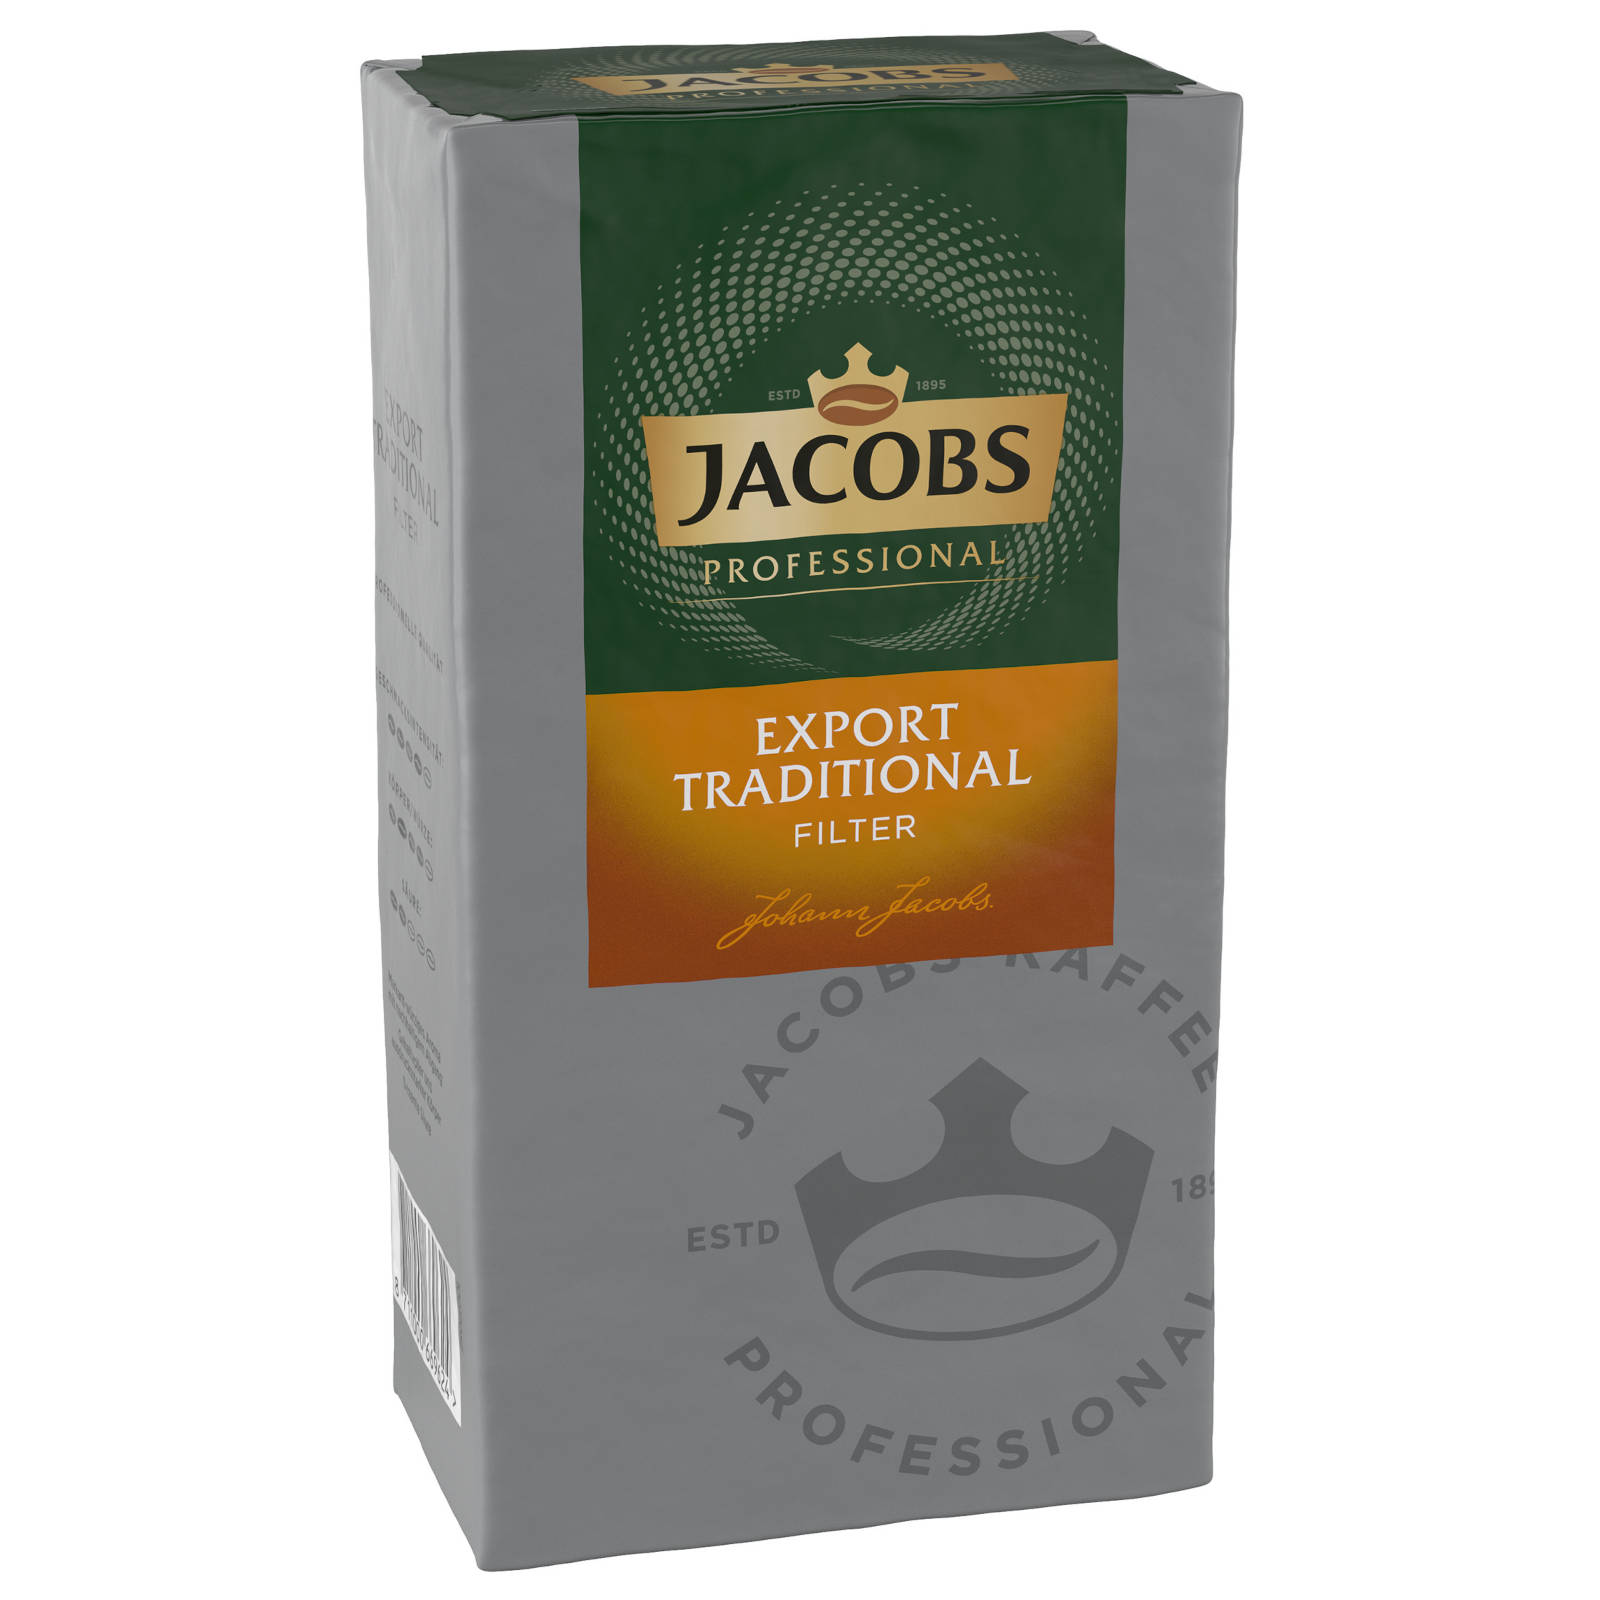 JACOBS Professional Export Traditional (Filter, 12x500 Filterkaffee Press) French g